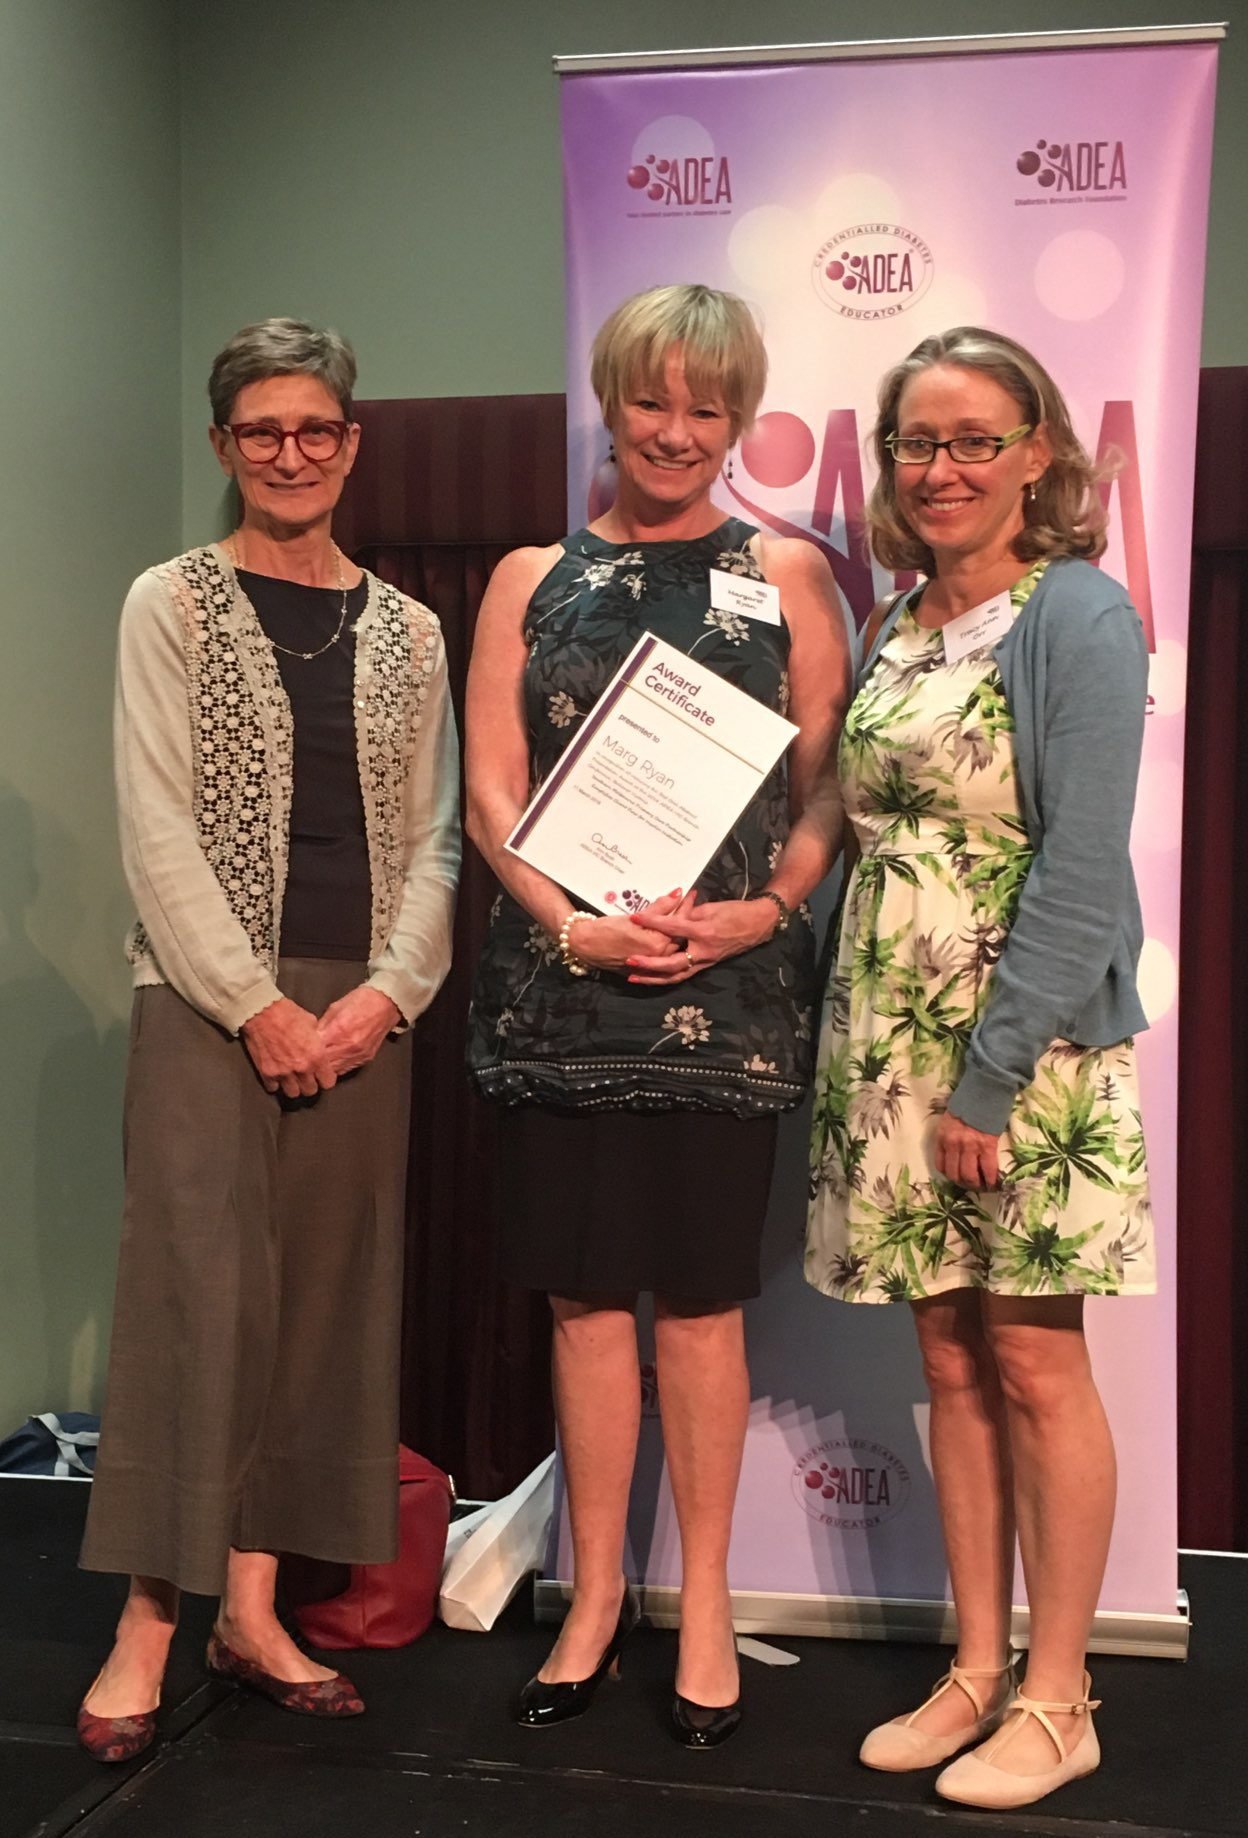 Image shows Joanne Ramadge, Marg Ryan and Tracy Orr with certificate